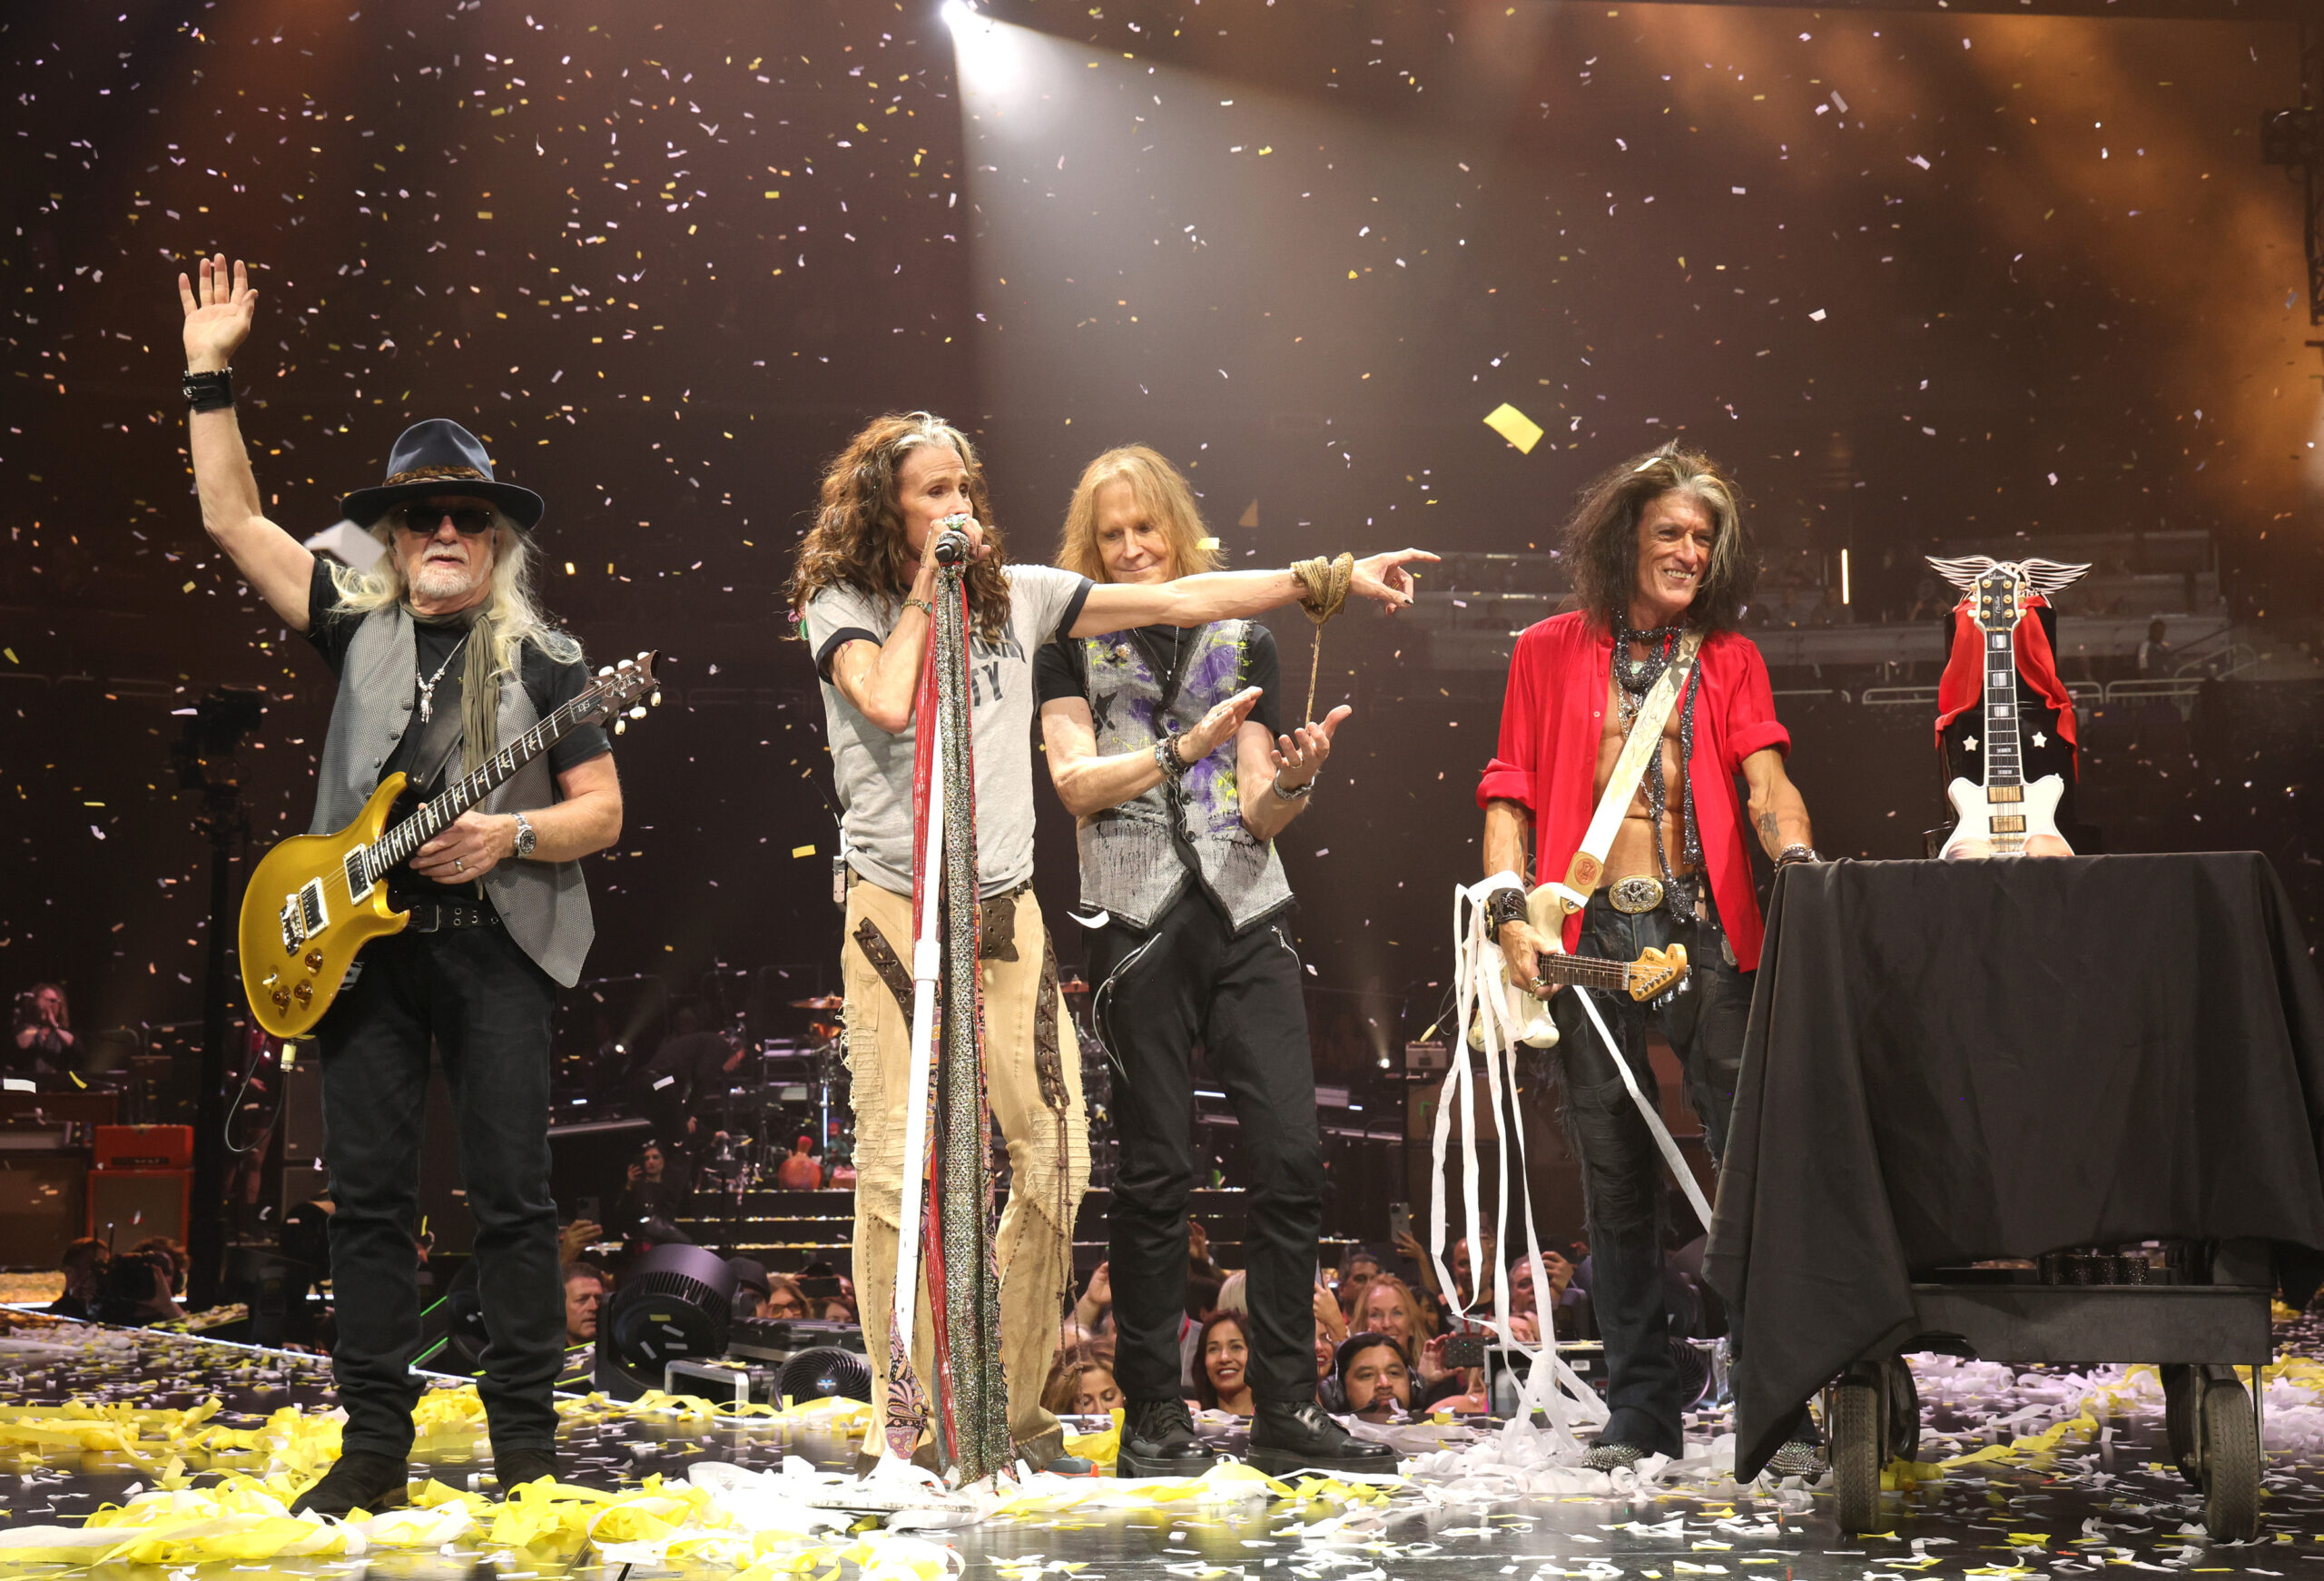 Aerosmith Play With Time at 50th Anniversary Show in Boston